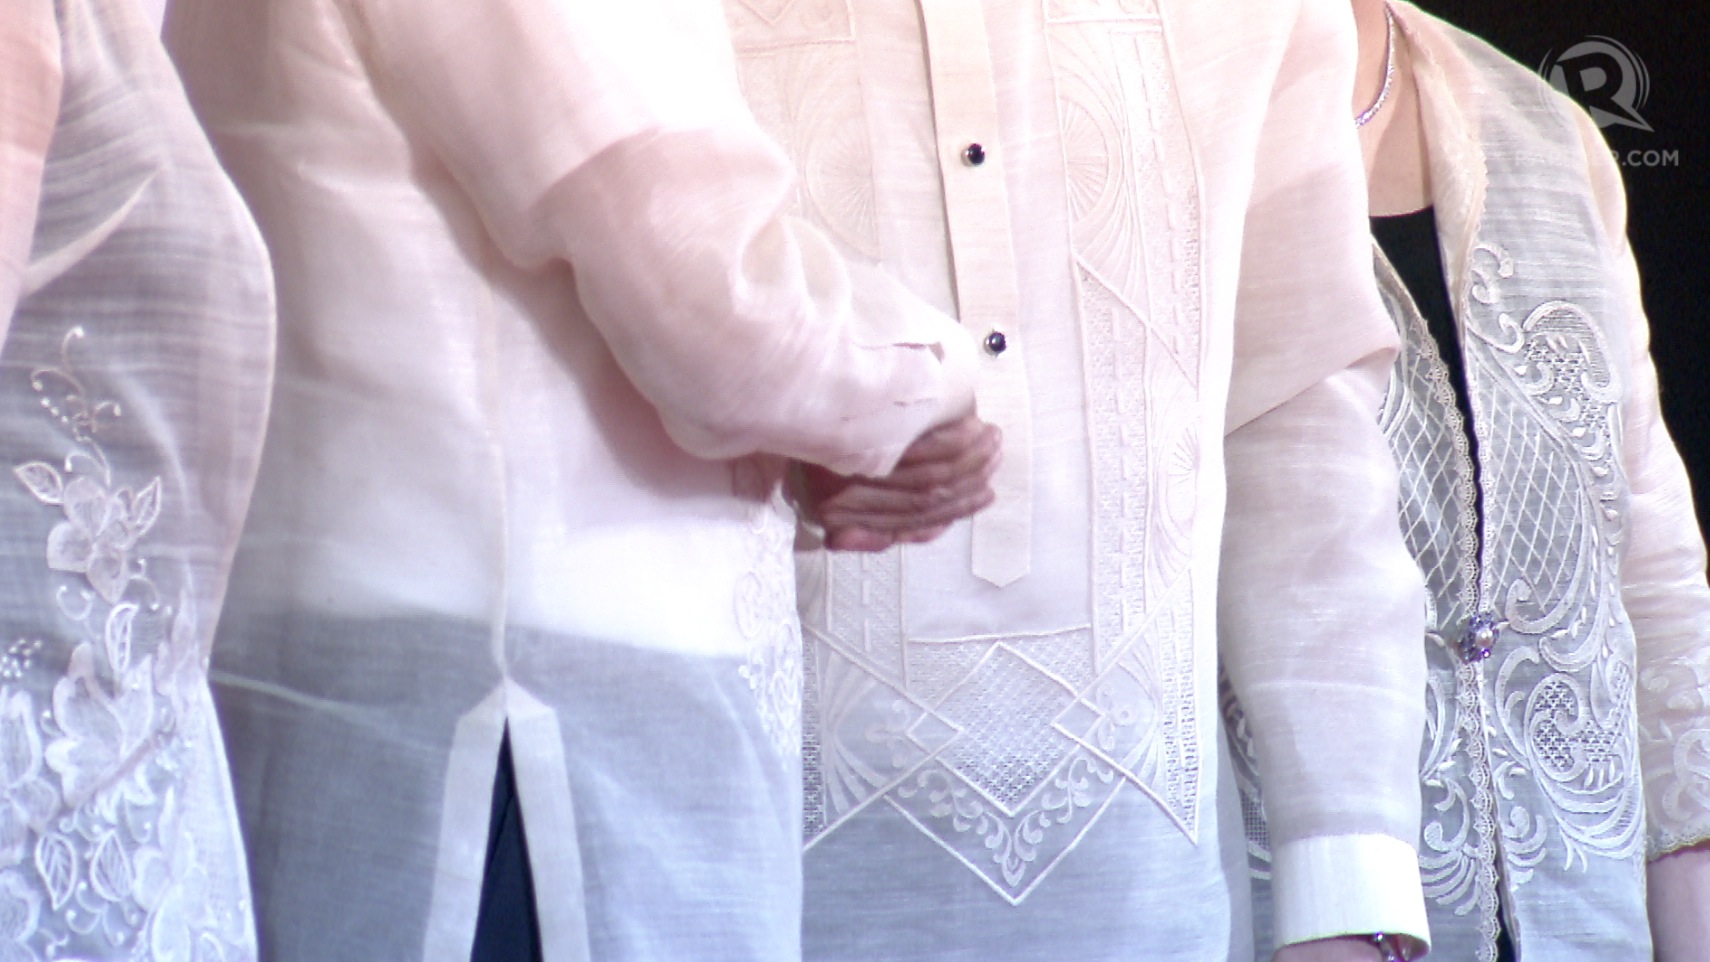 DETAILS. The embroidery on the Paul Cabral's barong designs. Rappler screengrab 